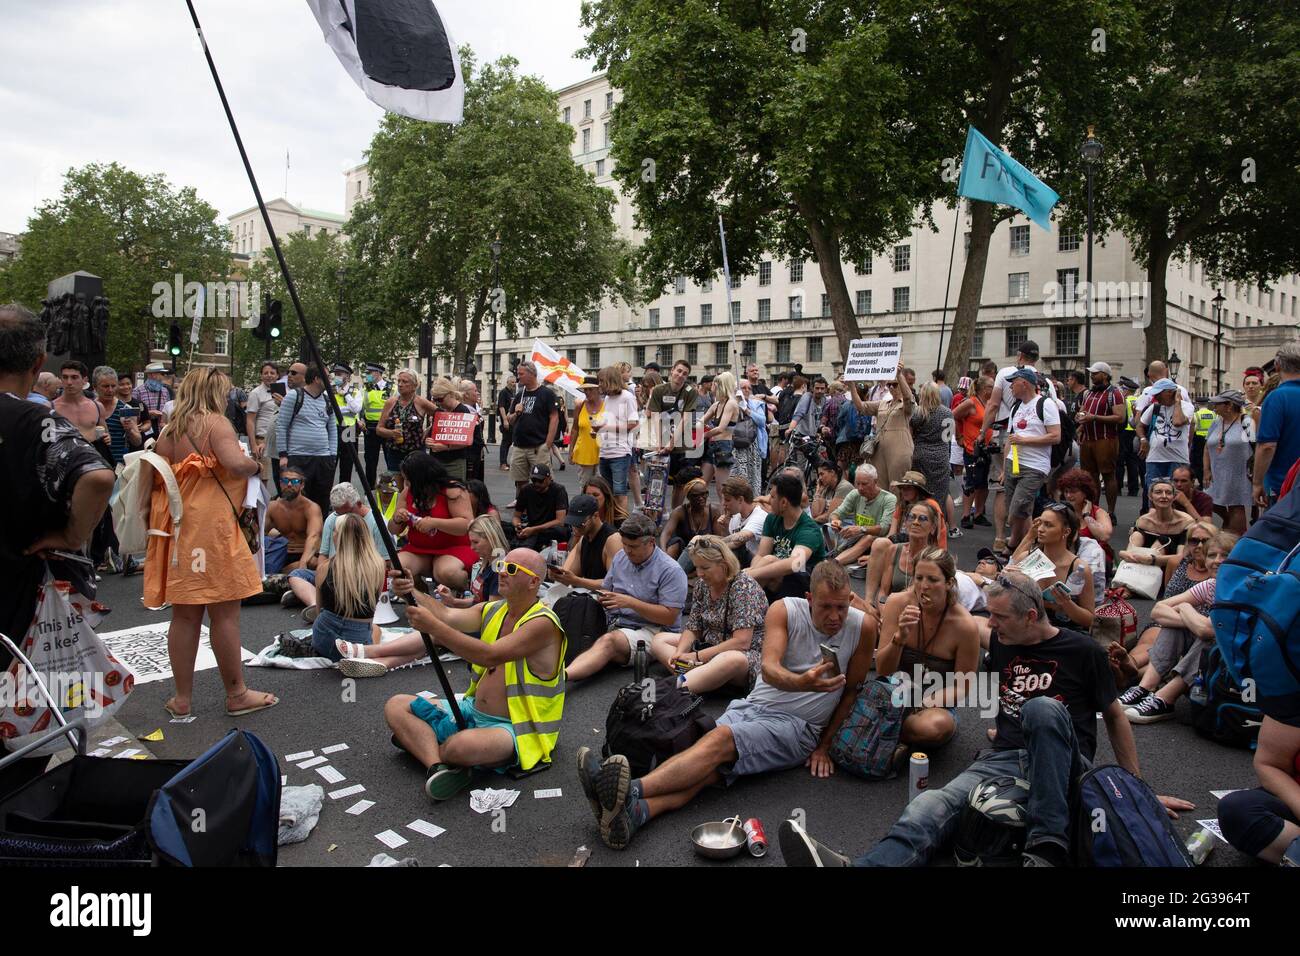 London, UK. 14th June 2021. Anti-vaxx protesters gather outside Downing Street. Yuen Ching Ng/Alamy Live News Stock Photo